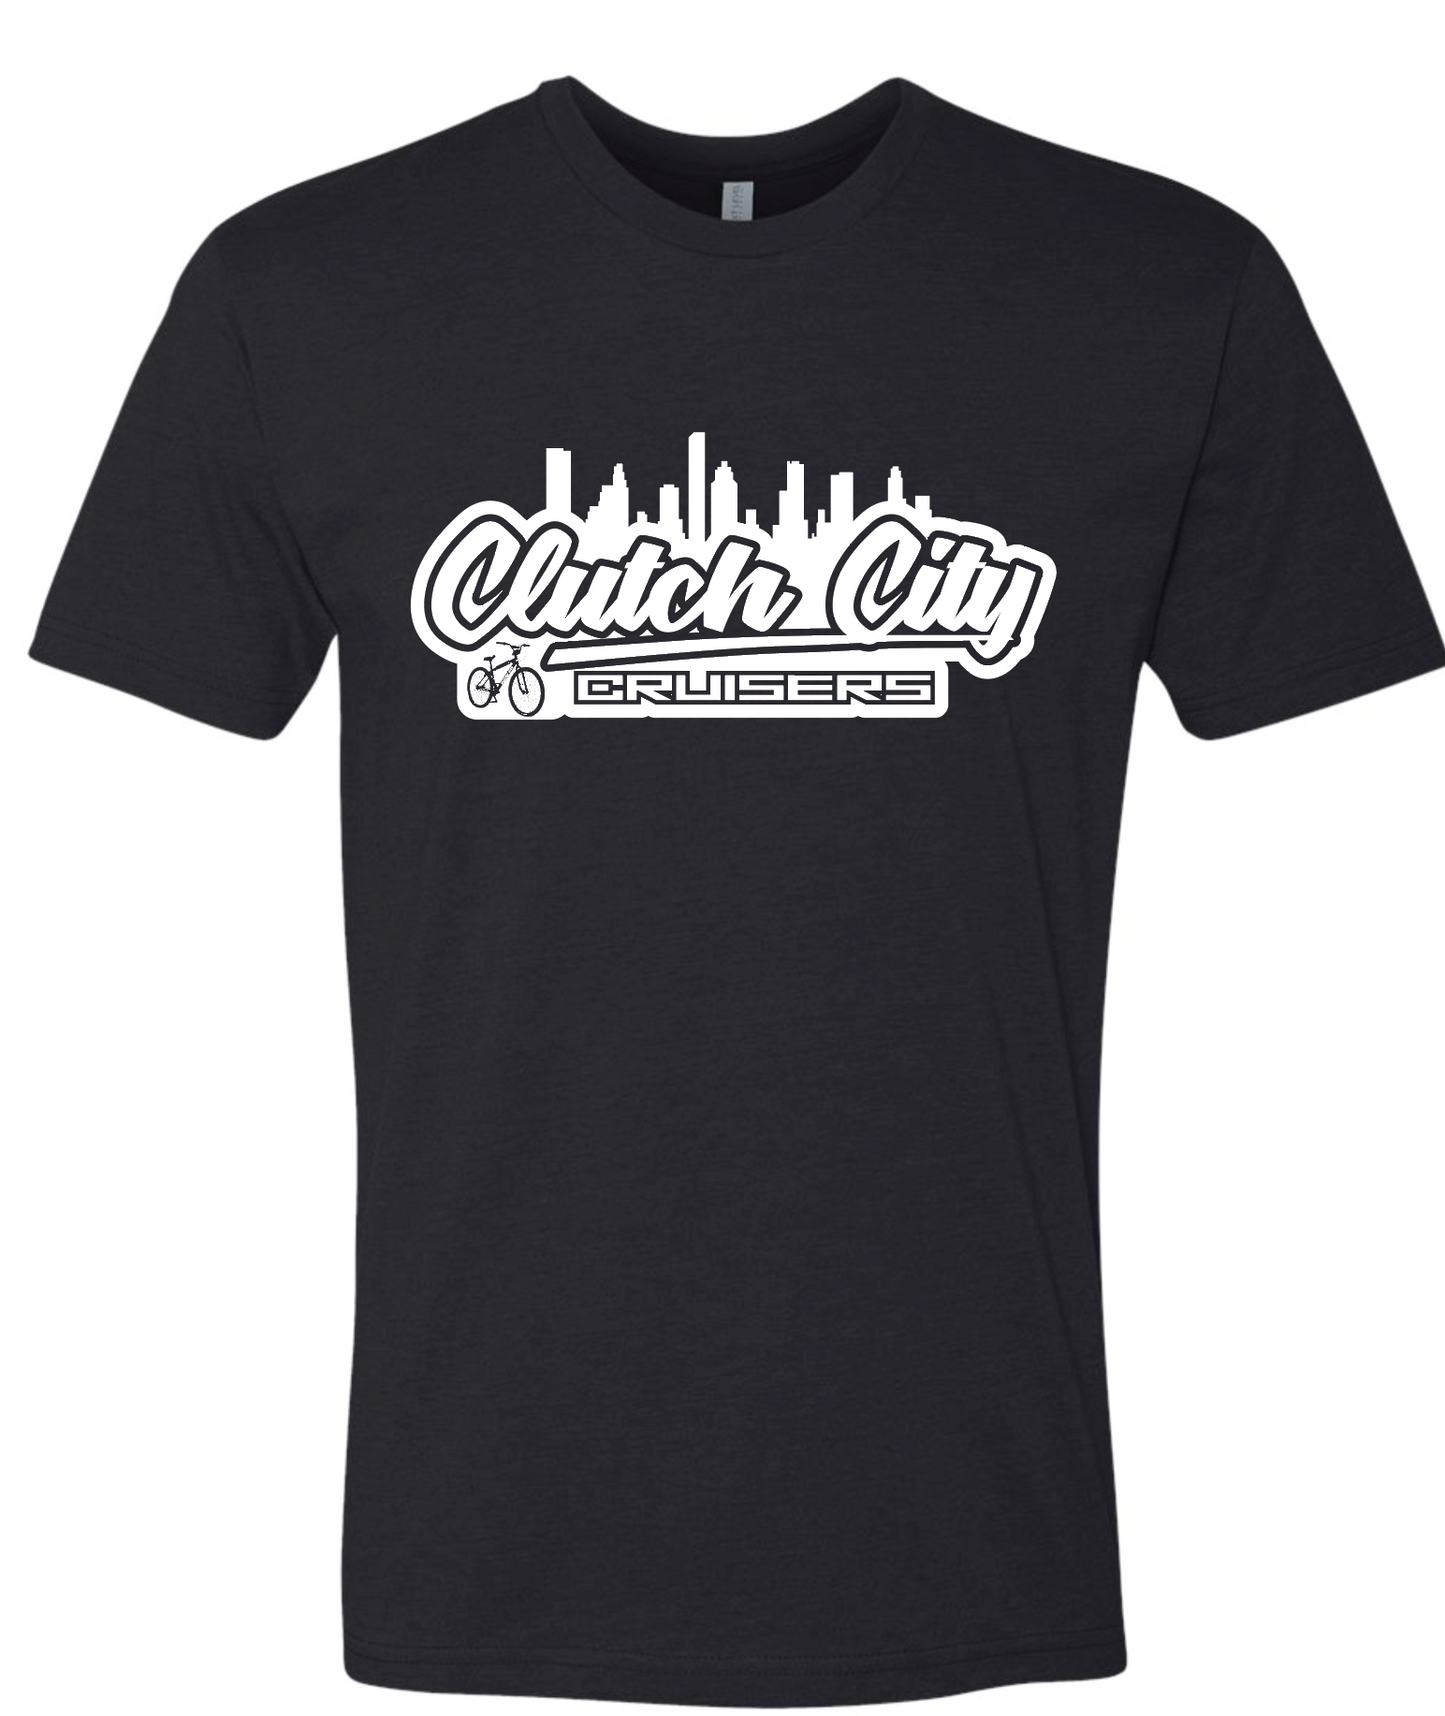 Clutch City Tee Black with White Print